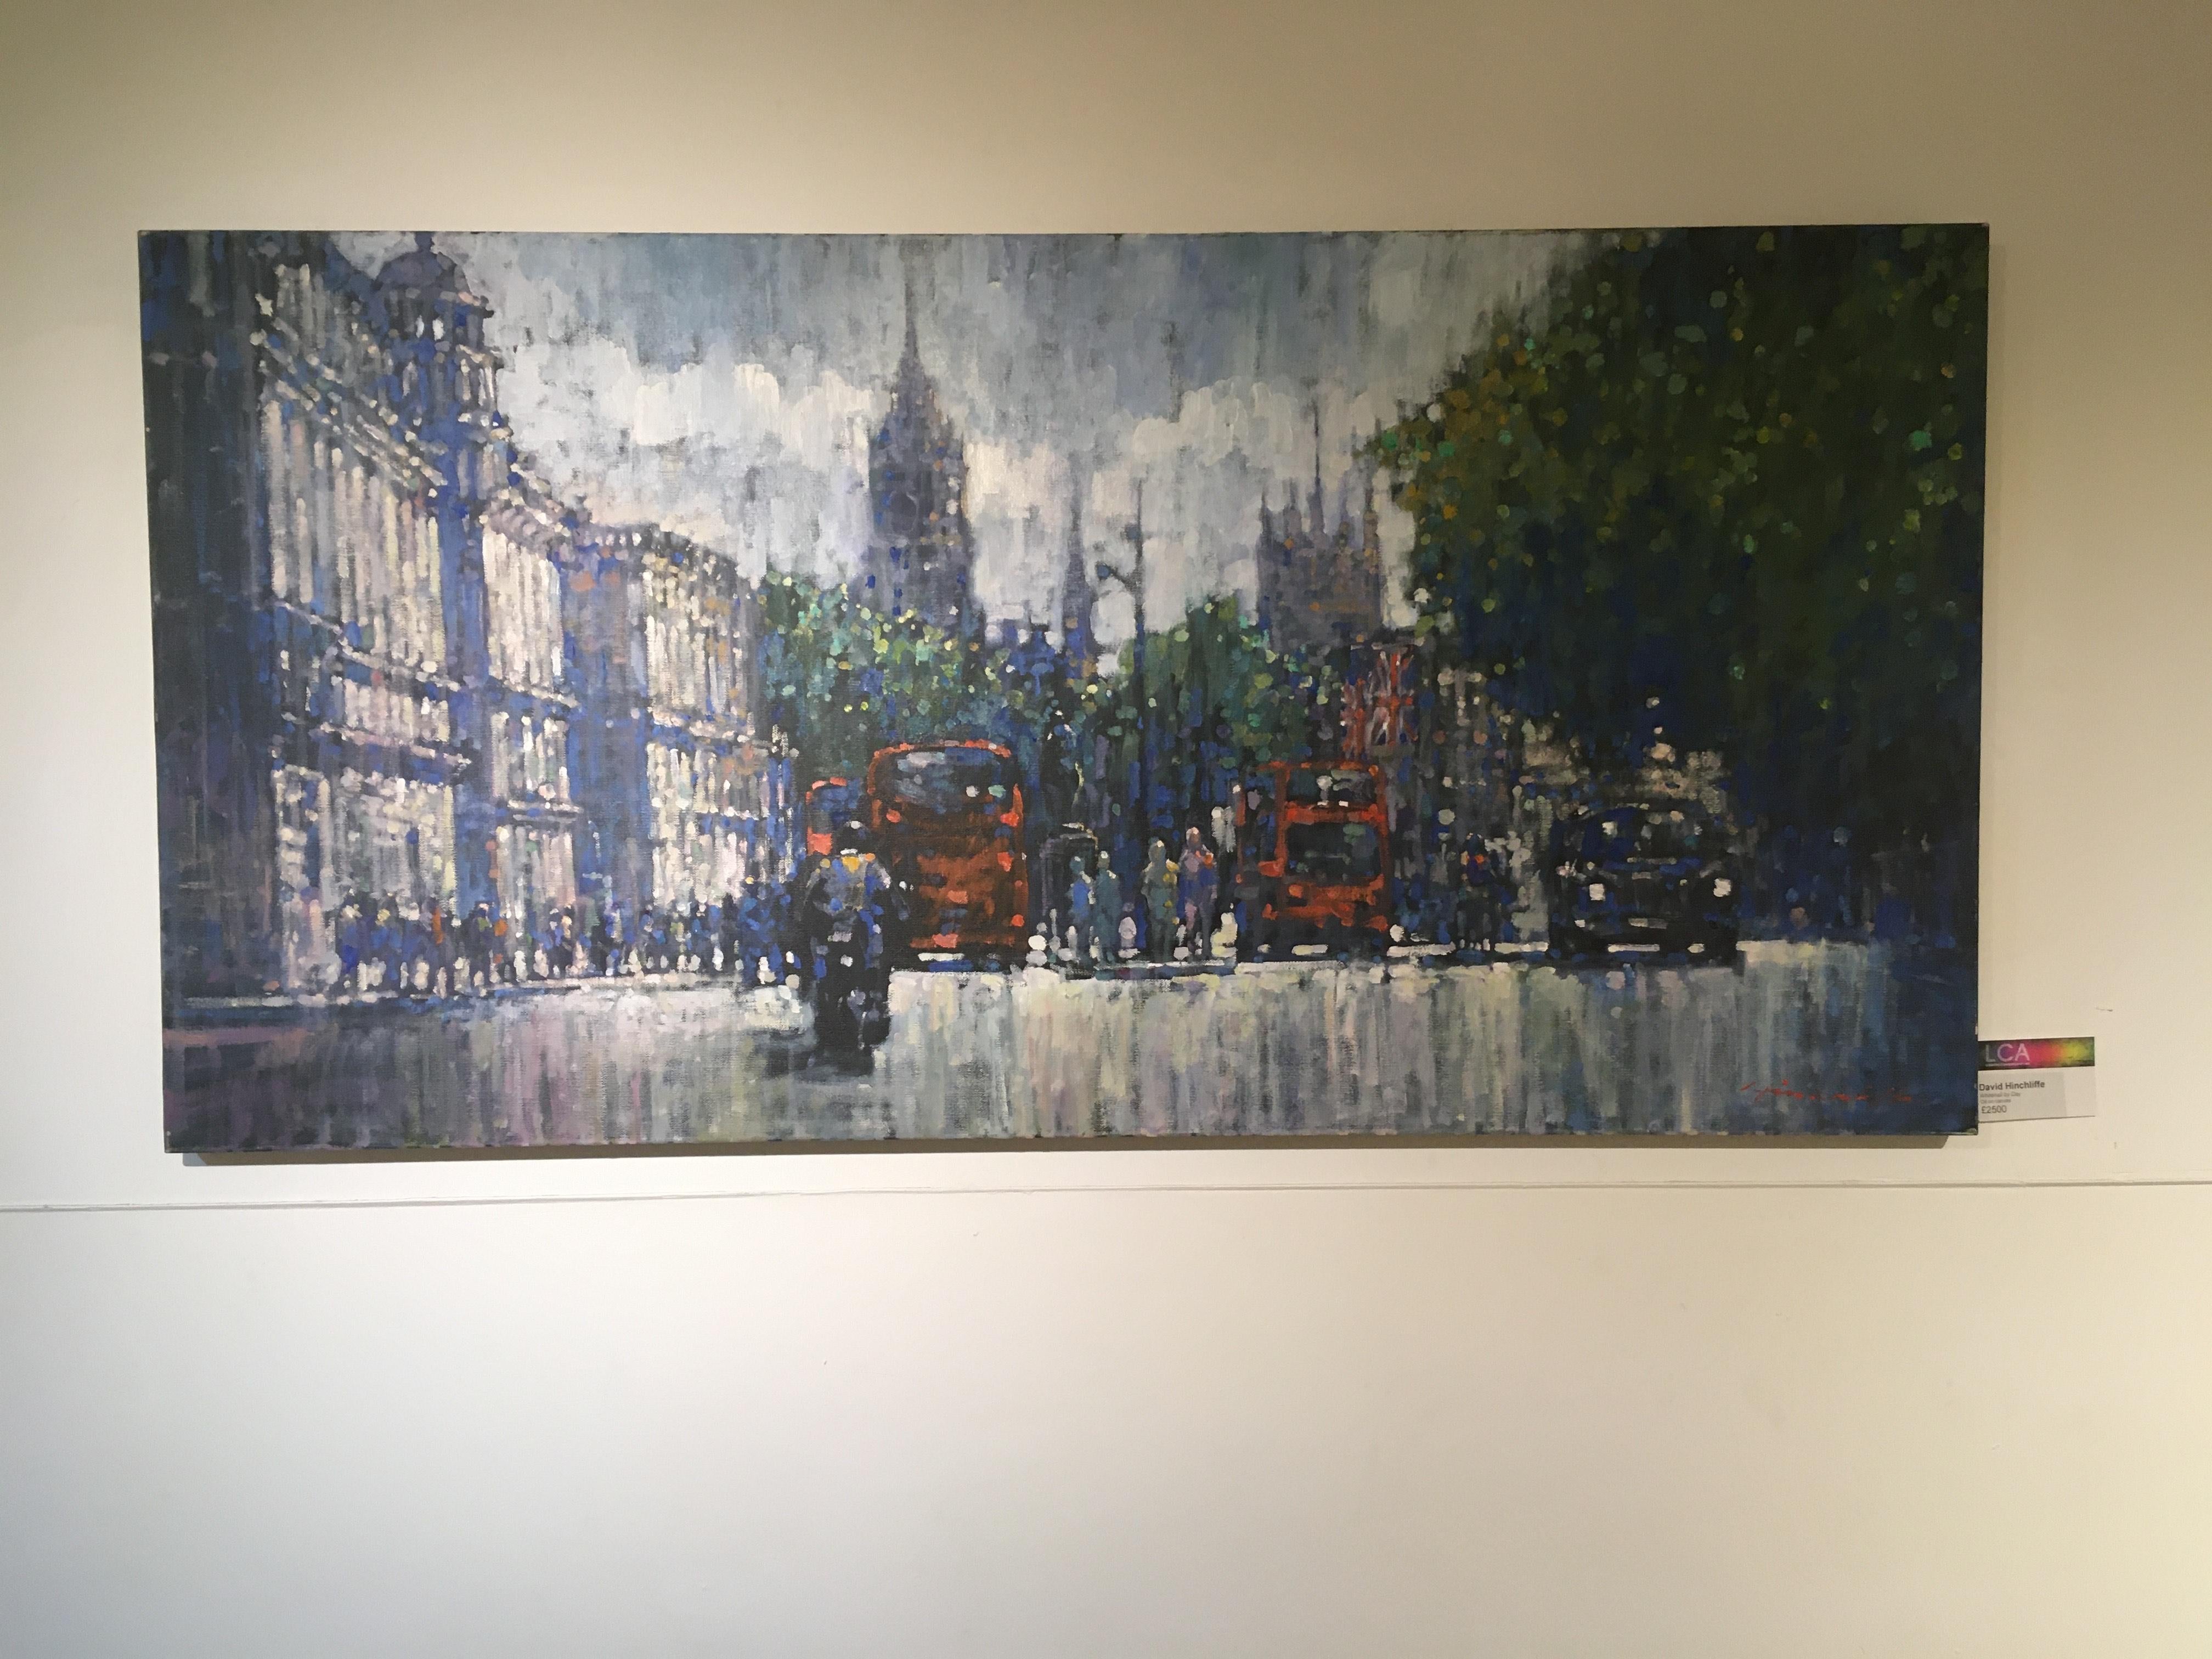 Whitehall by Day - contemporary impressionism London cityscape pianting traffic - Painting by David Hinchliffe